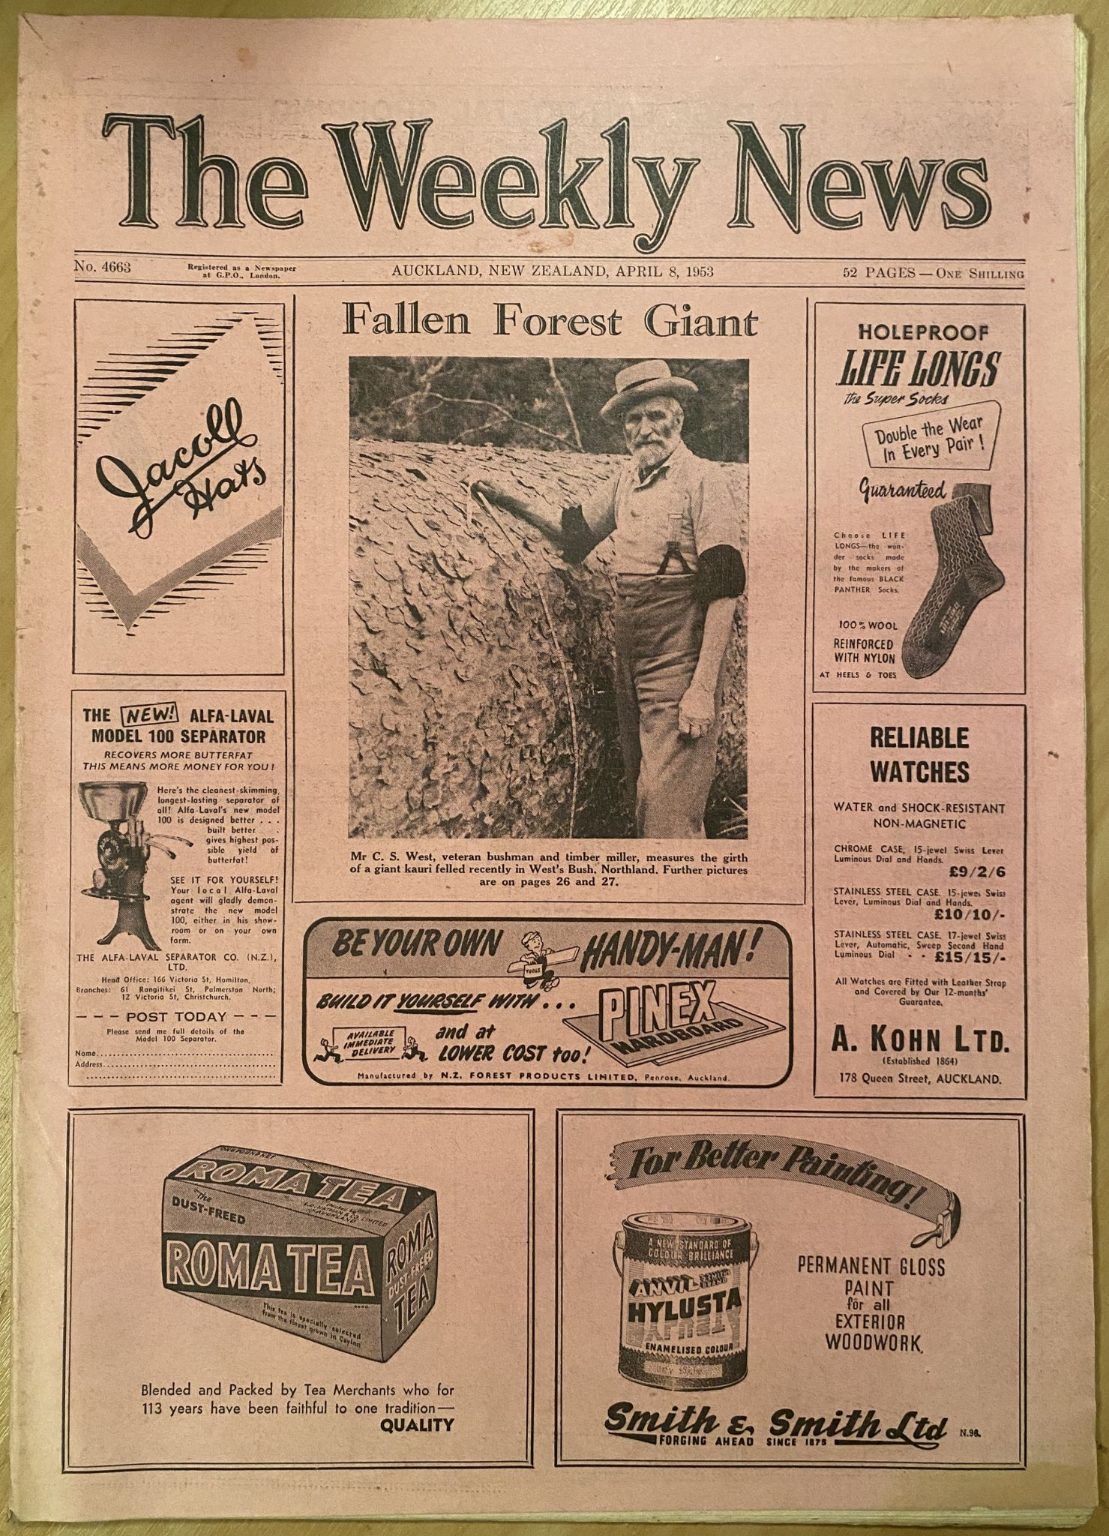 OLD NEWSPAPER: The Weekly News - No. 4663, 8 April 1953